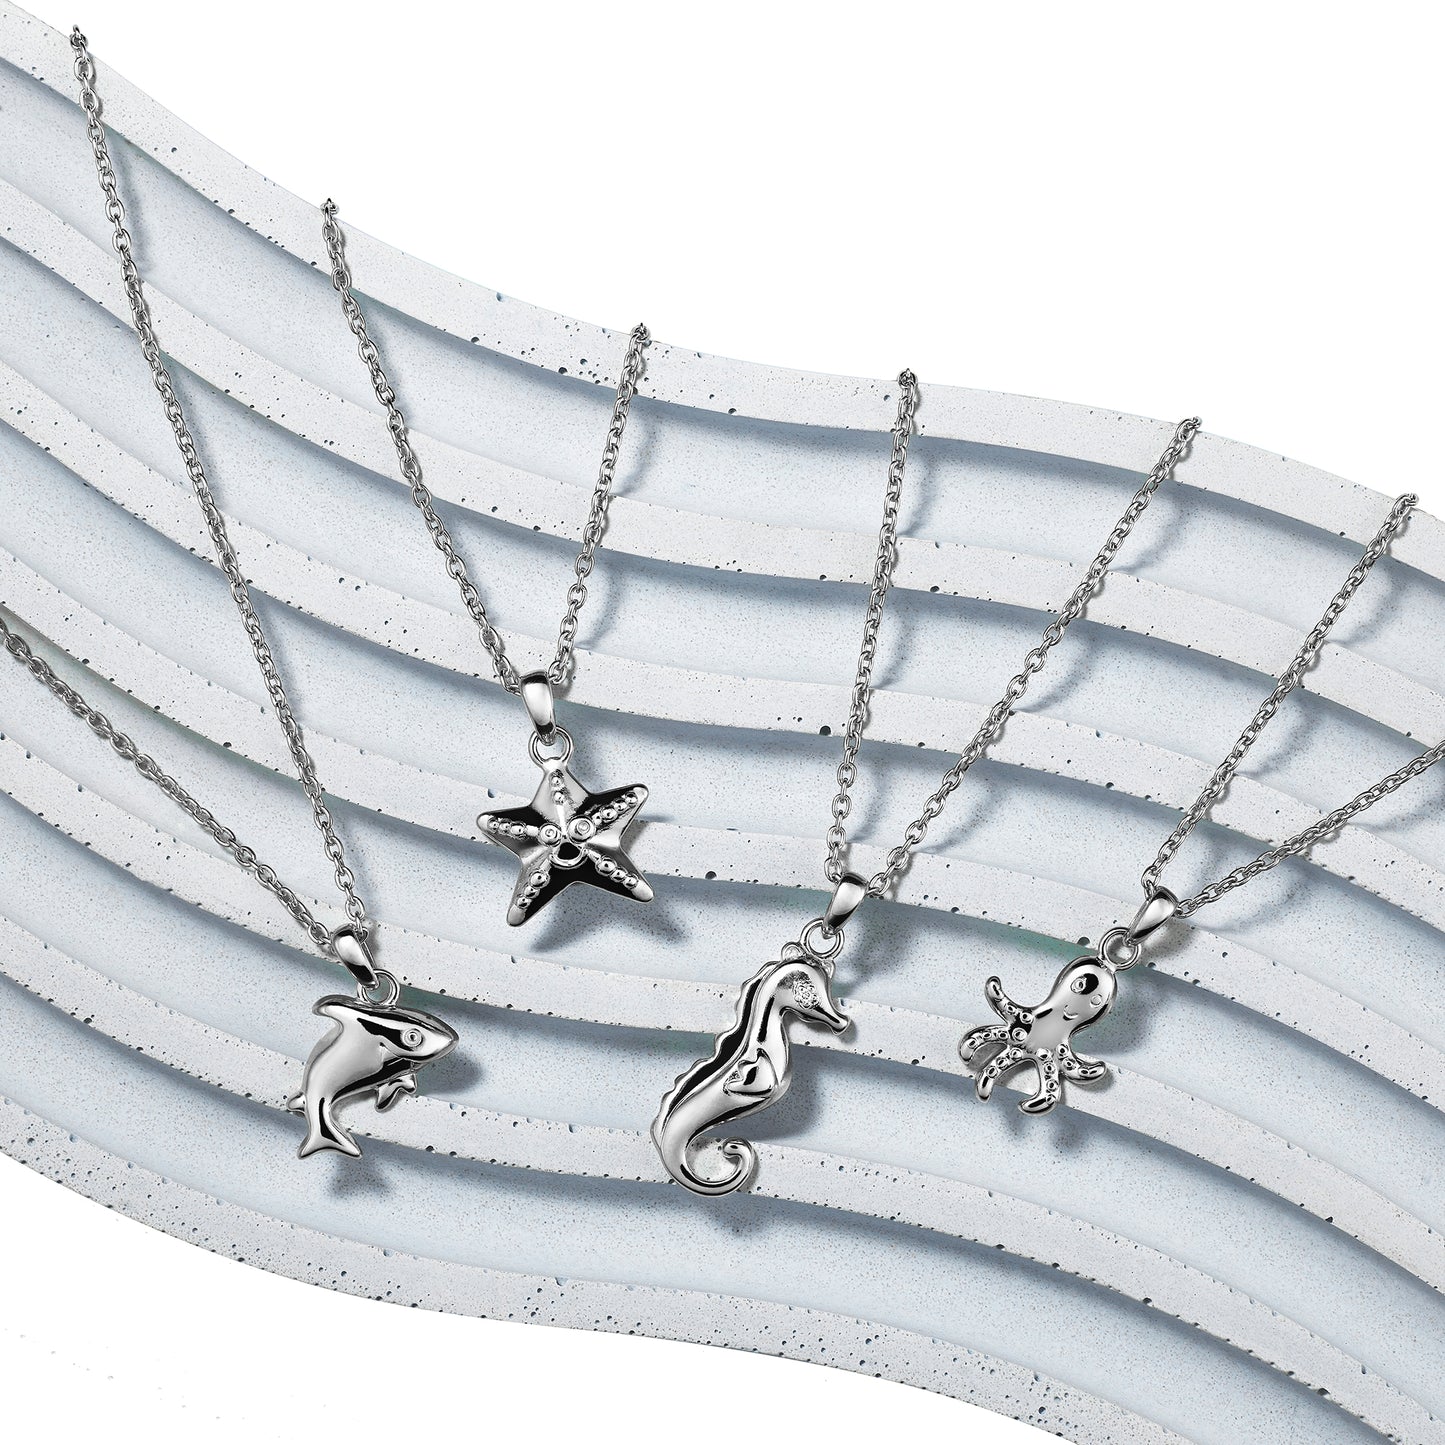 Under the Sea collection of silver children's necklaces including shark, starfish, seahorse, and octopus all on Extendable Chain Necklaces